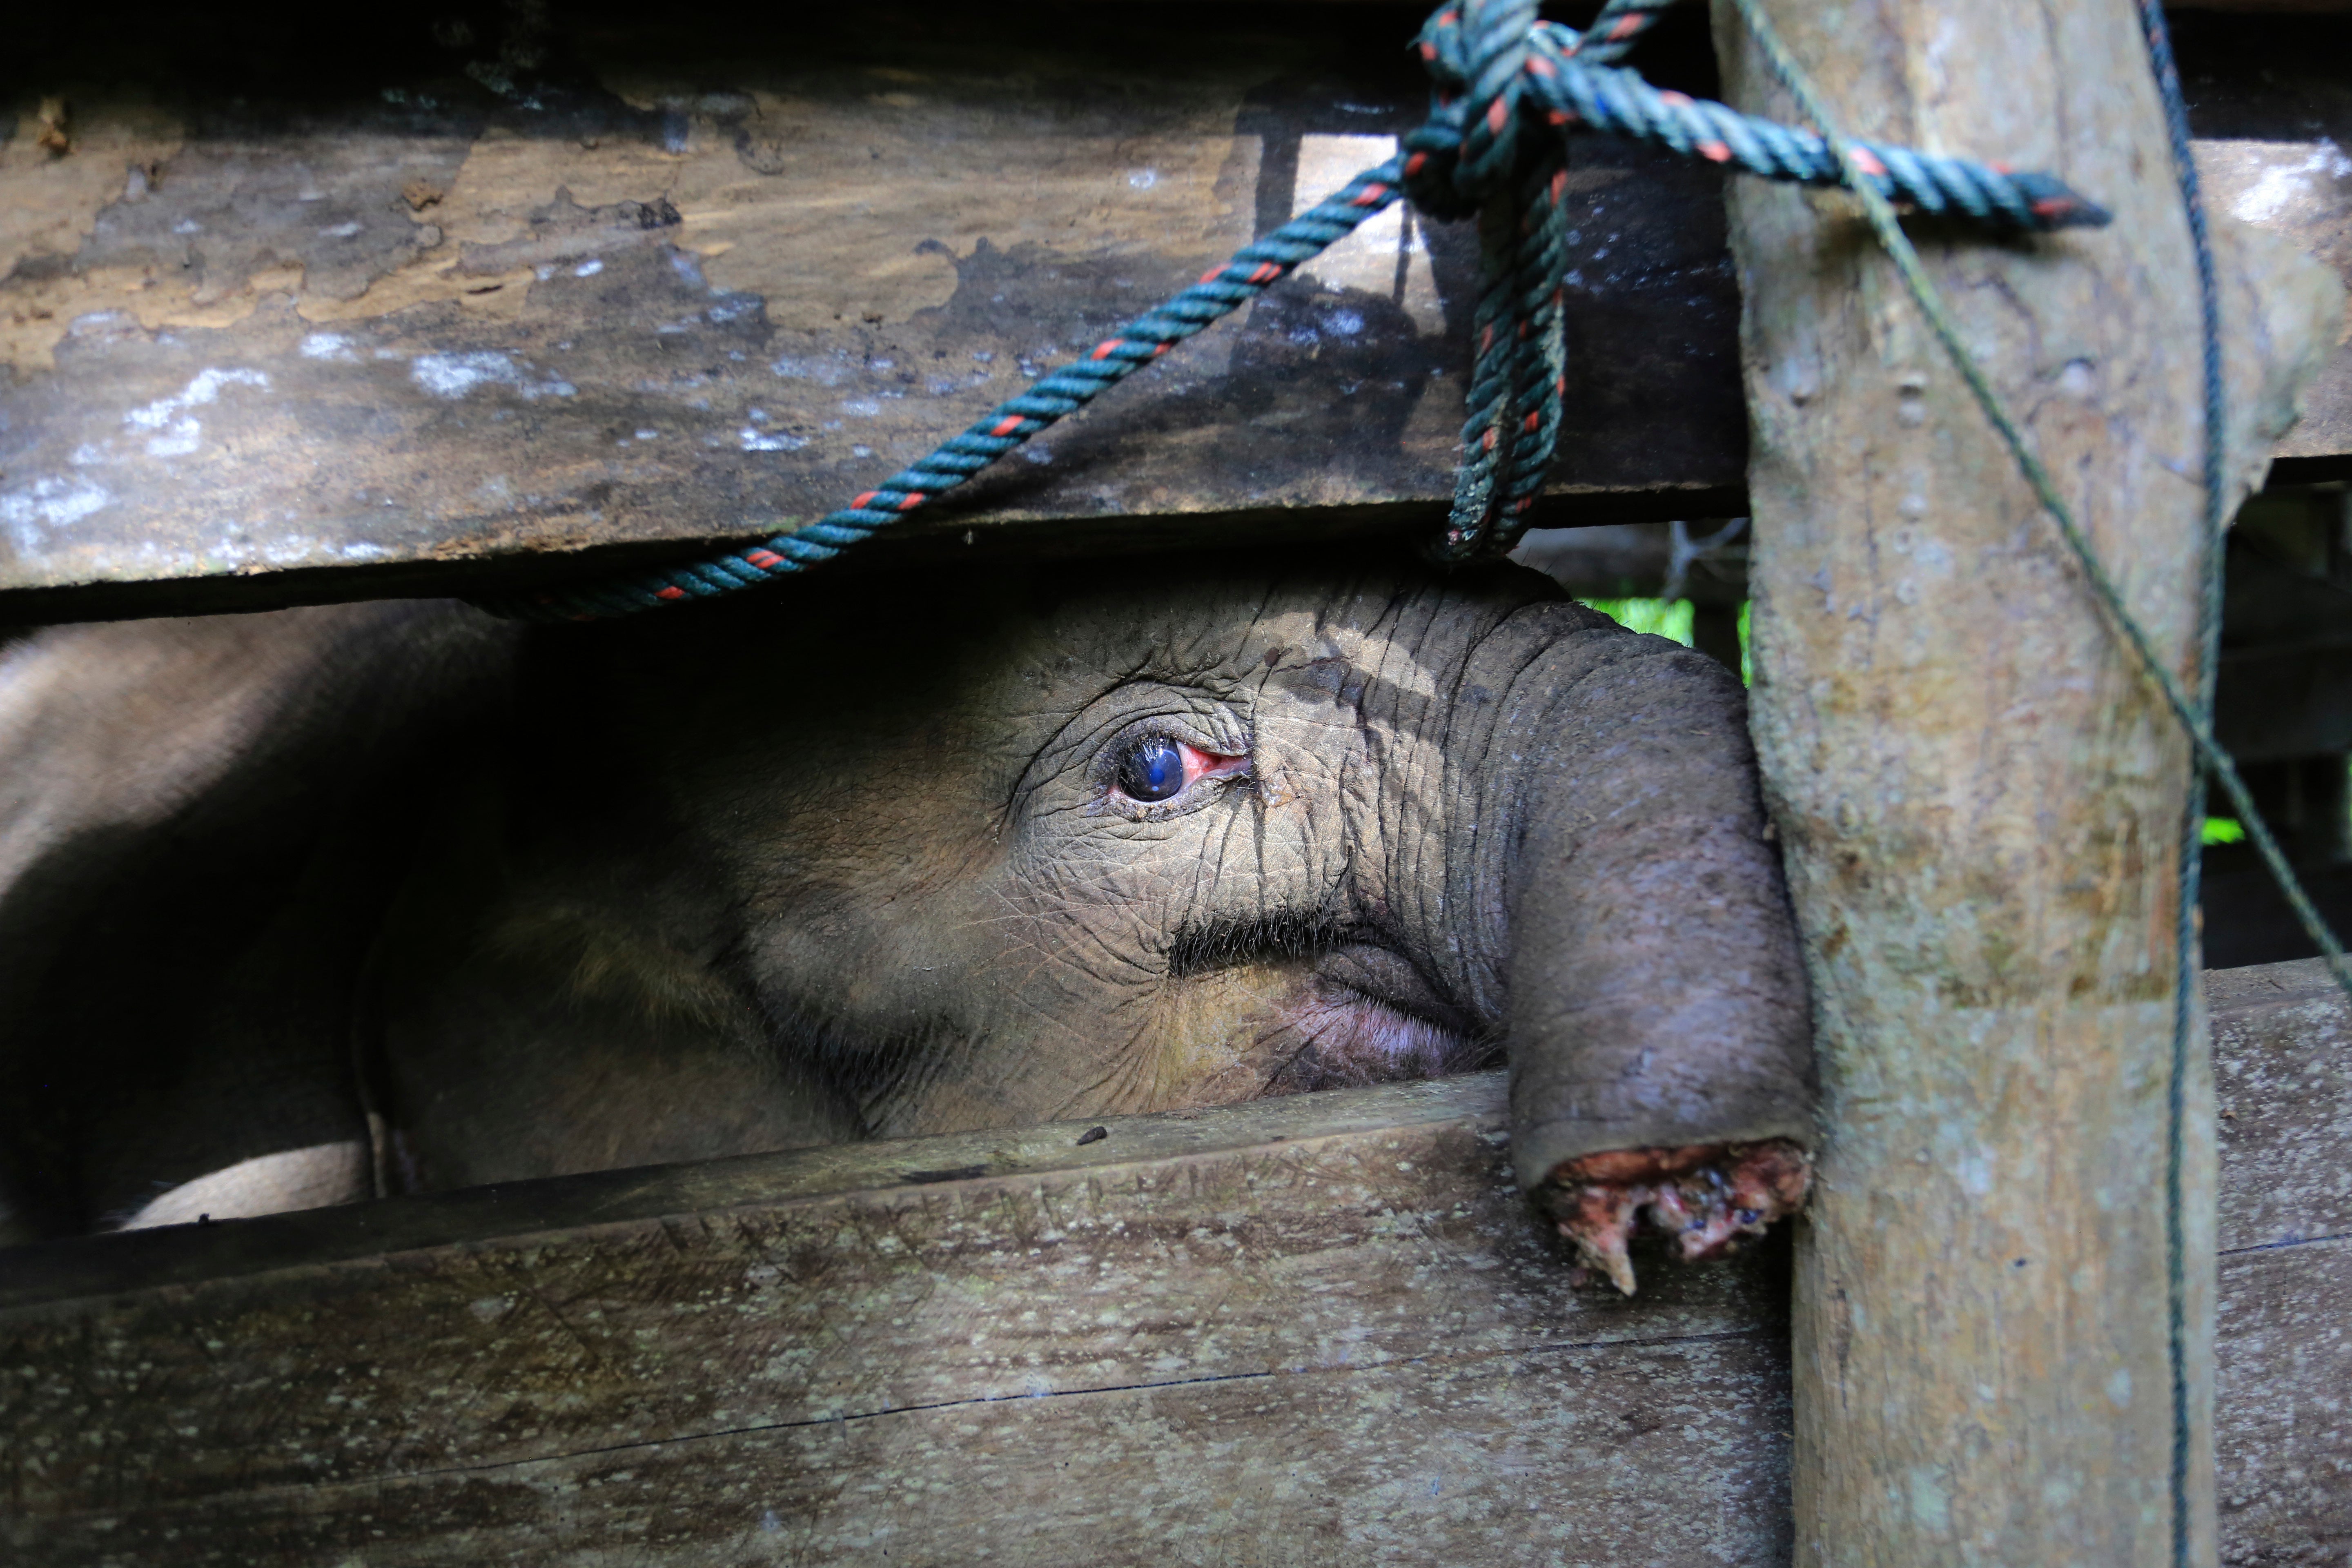 A Sumatran elephant calf that lost half of its trunk succumbed to her injuries